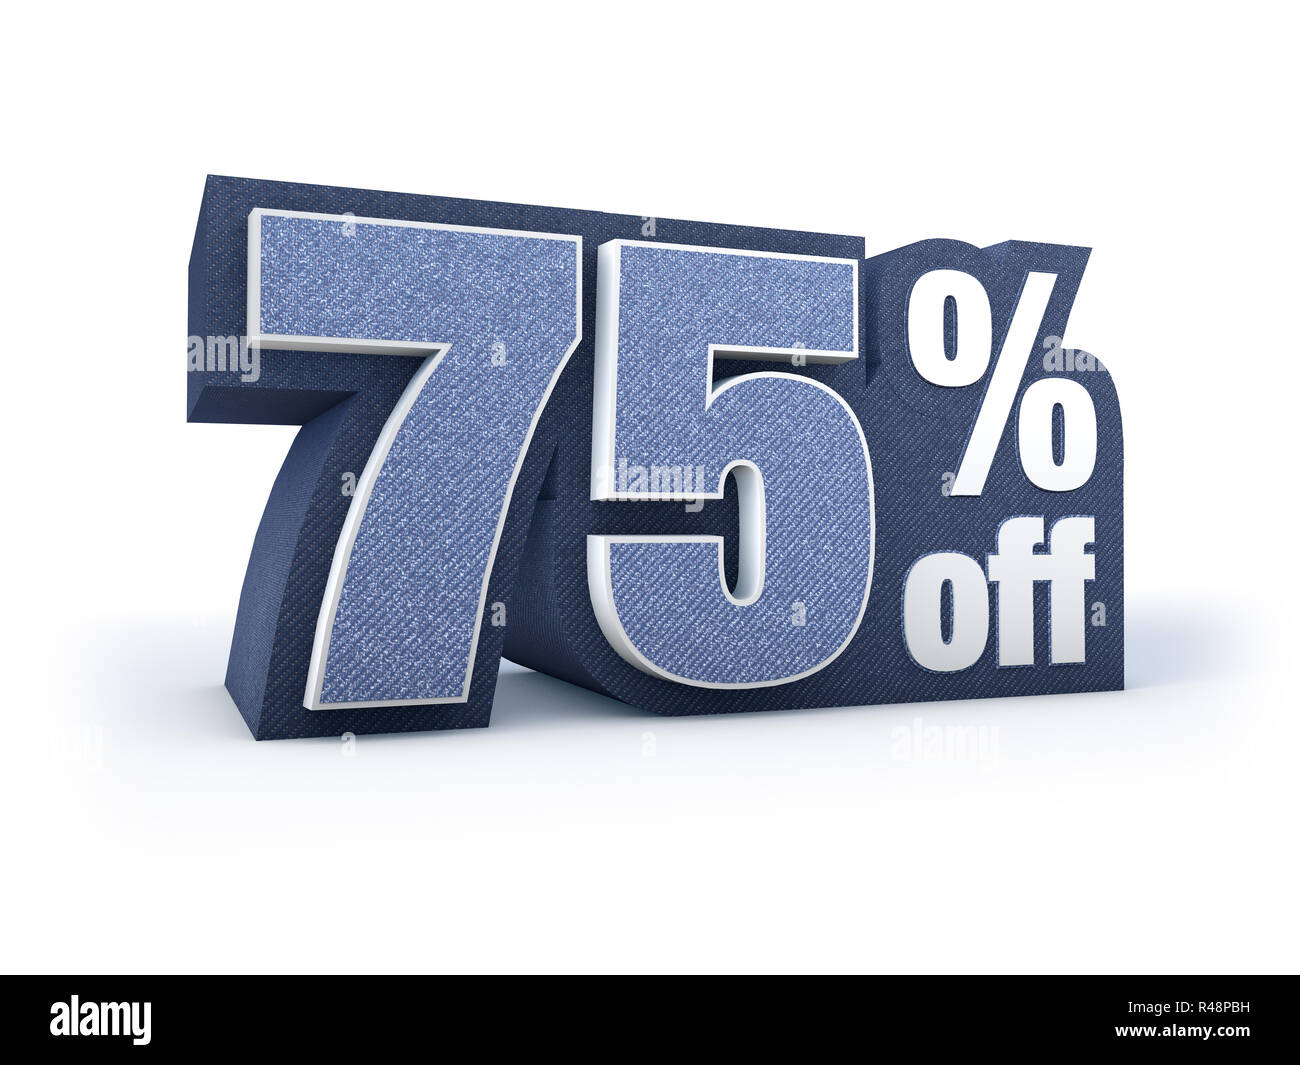 75 percent off denim styled discount price sign Stock Photo